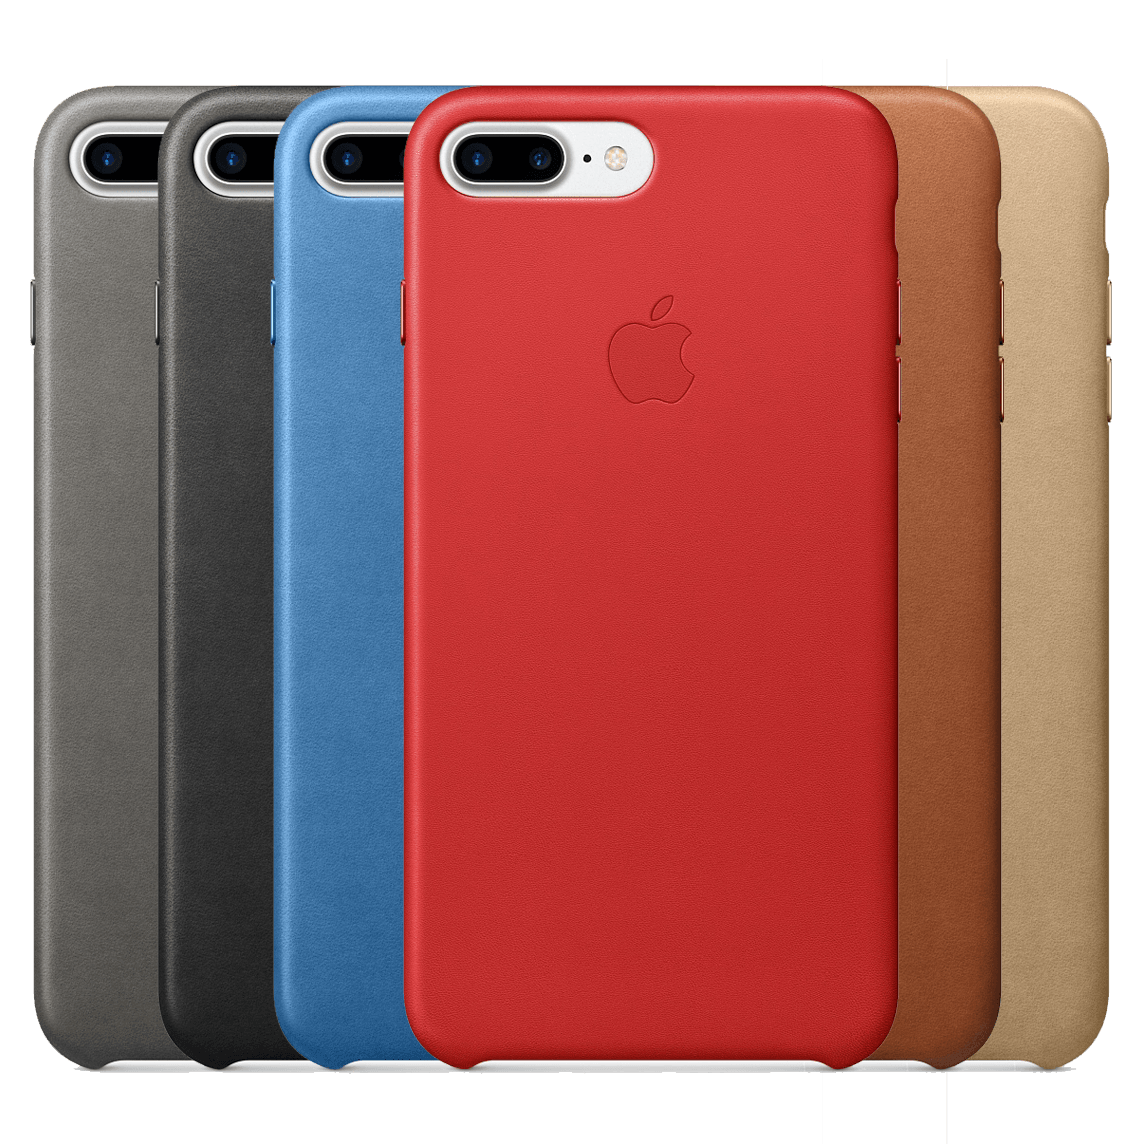 IPHONE7 LEATHER